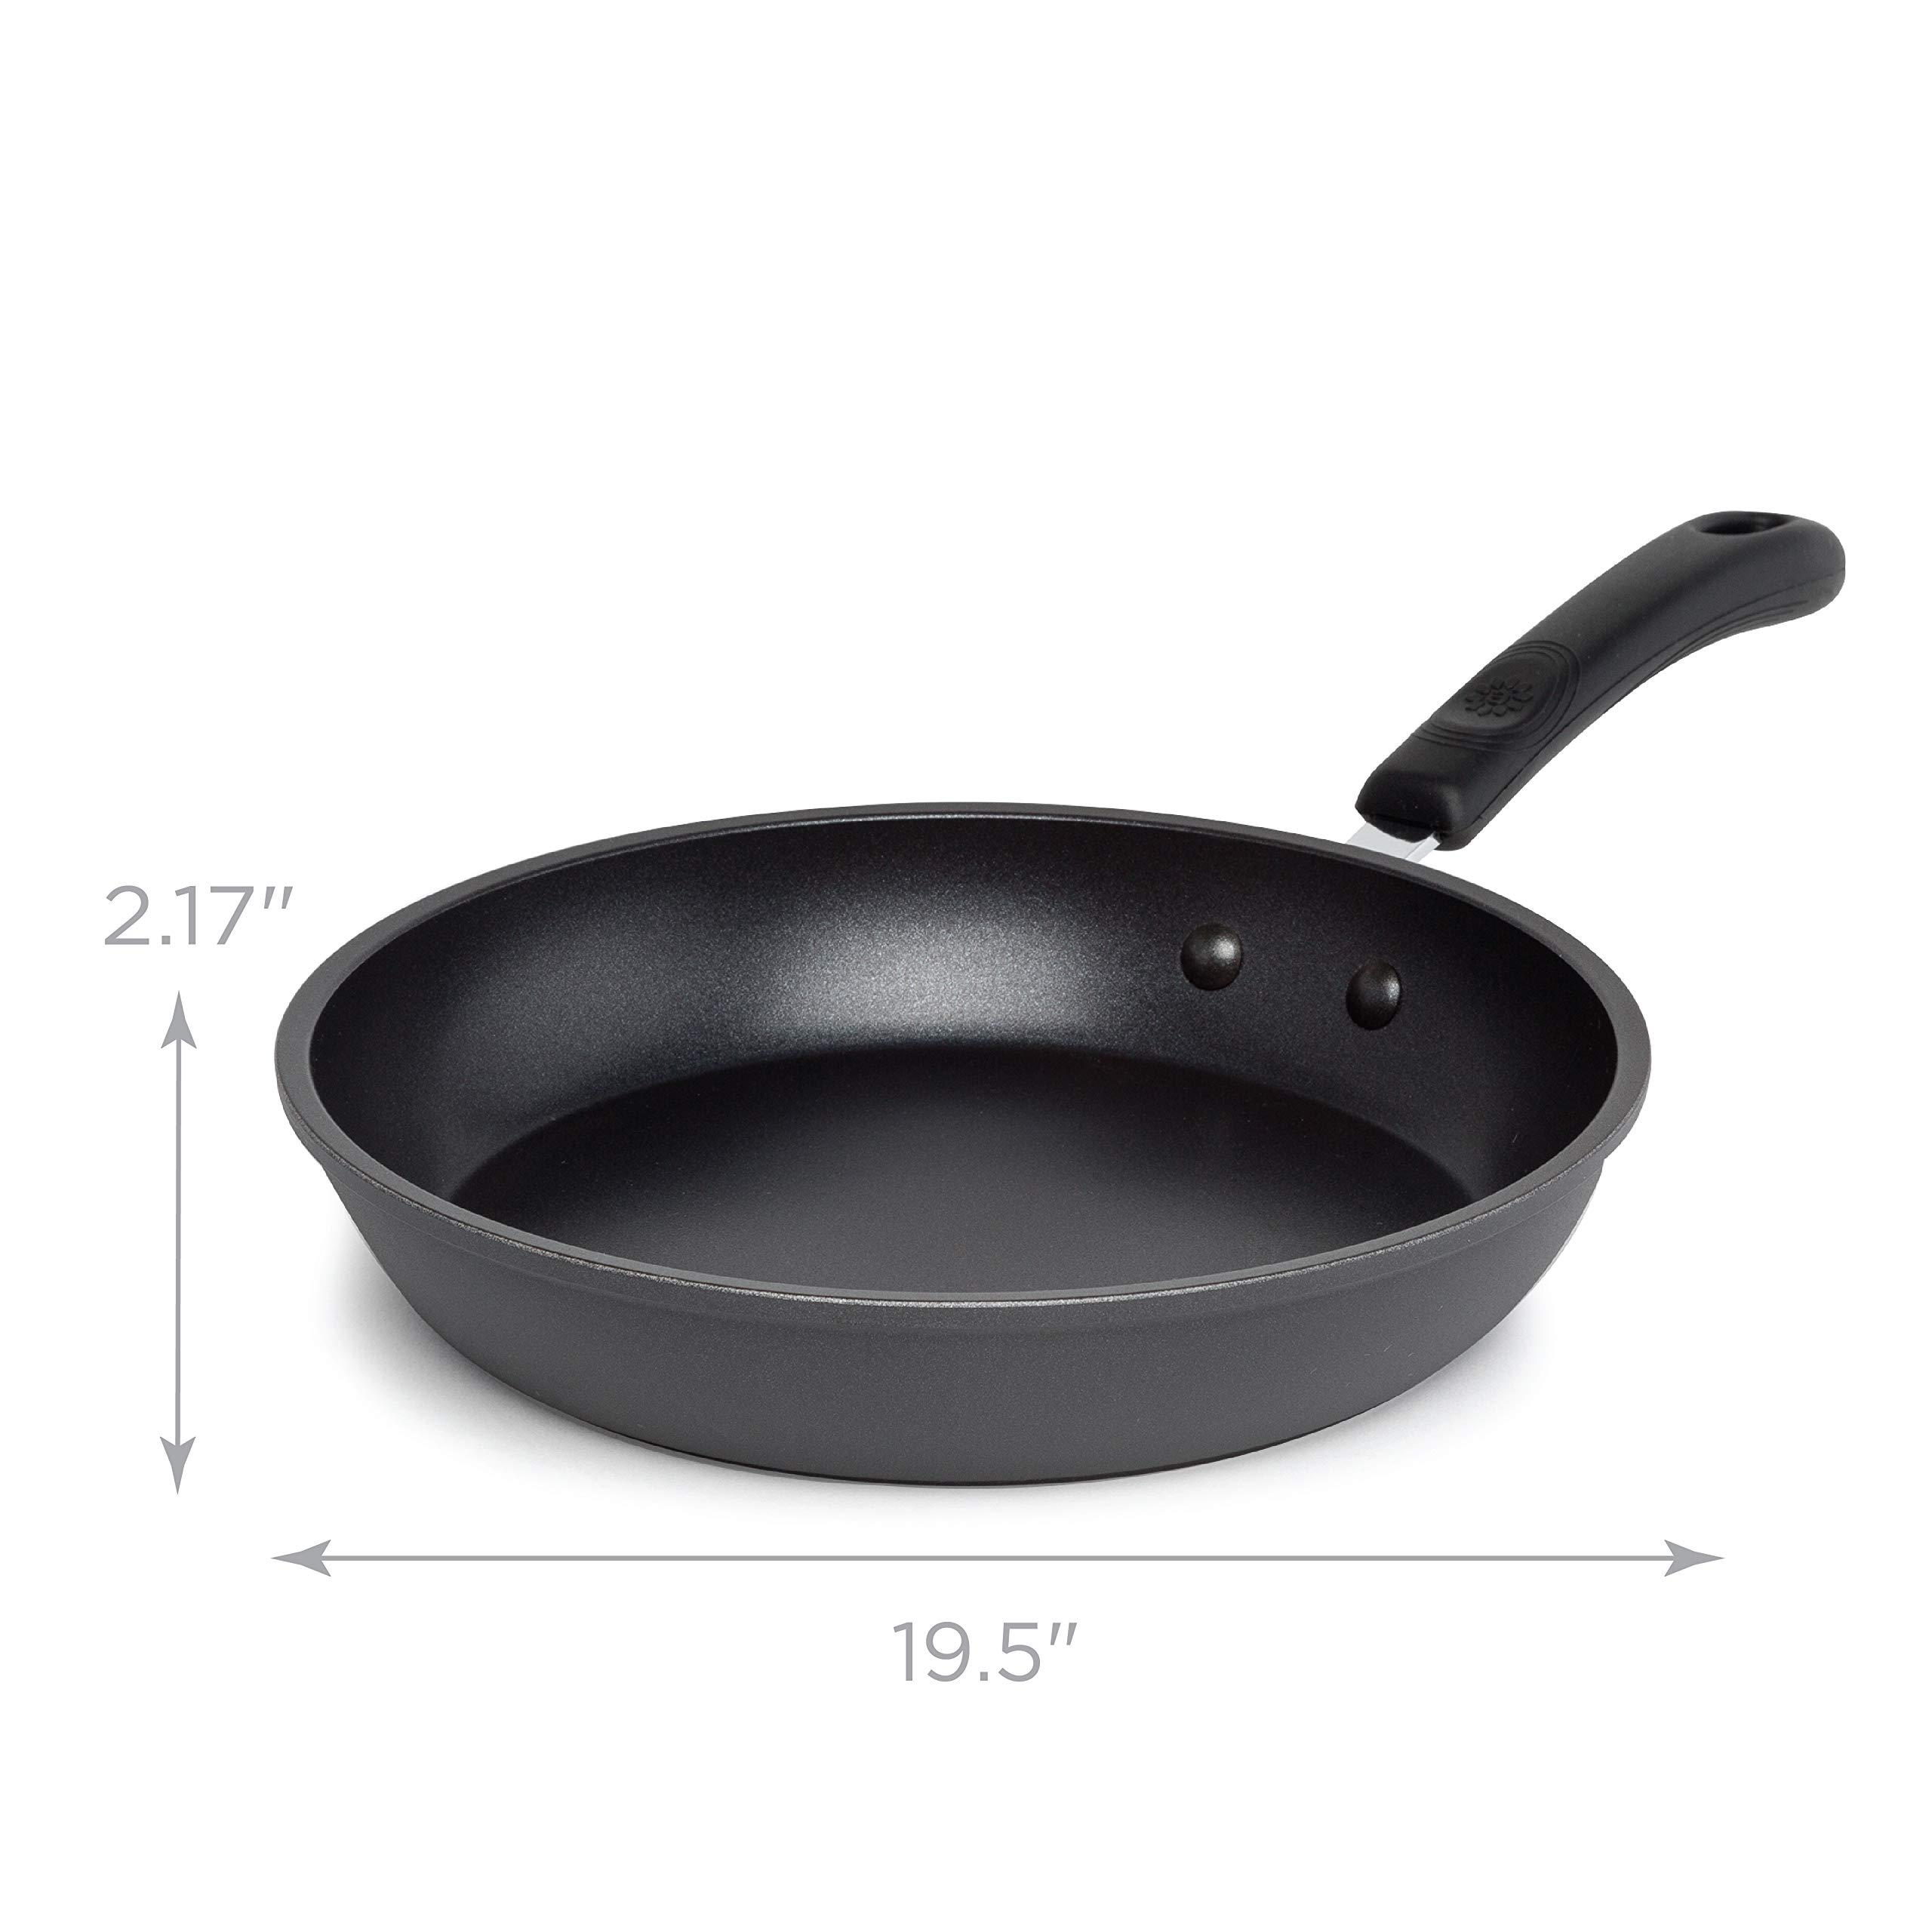 Ecolution Symphony Reinforced Ergonomic Cool-Touch Silicone Handles, Dishwasher Safe, Nonstick, 11 Inch, Grey